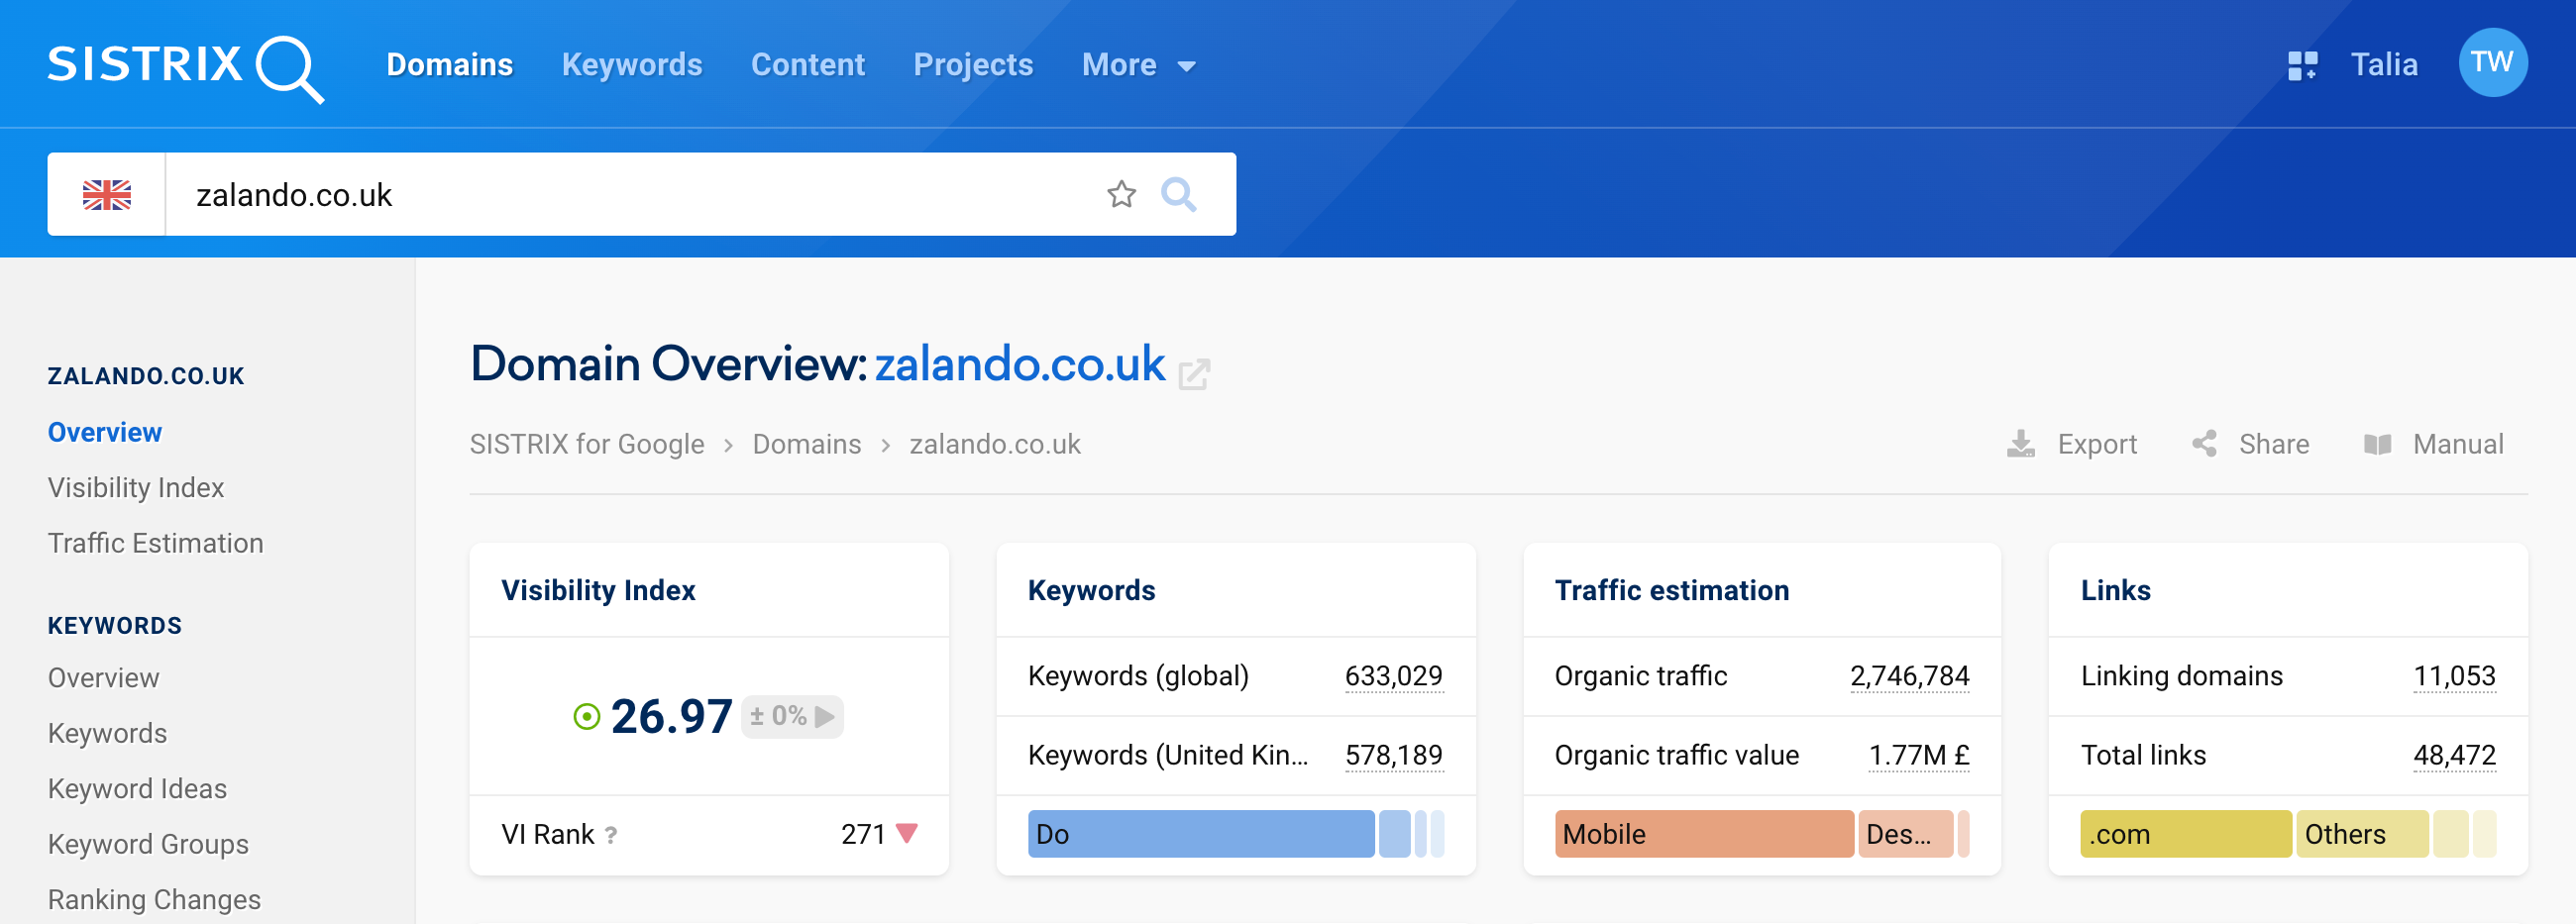 The domain overview of zalando.co.uk. The buttons for exporting, sharing and the manual are at the top right.